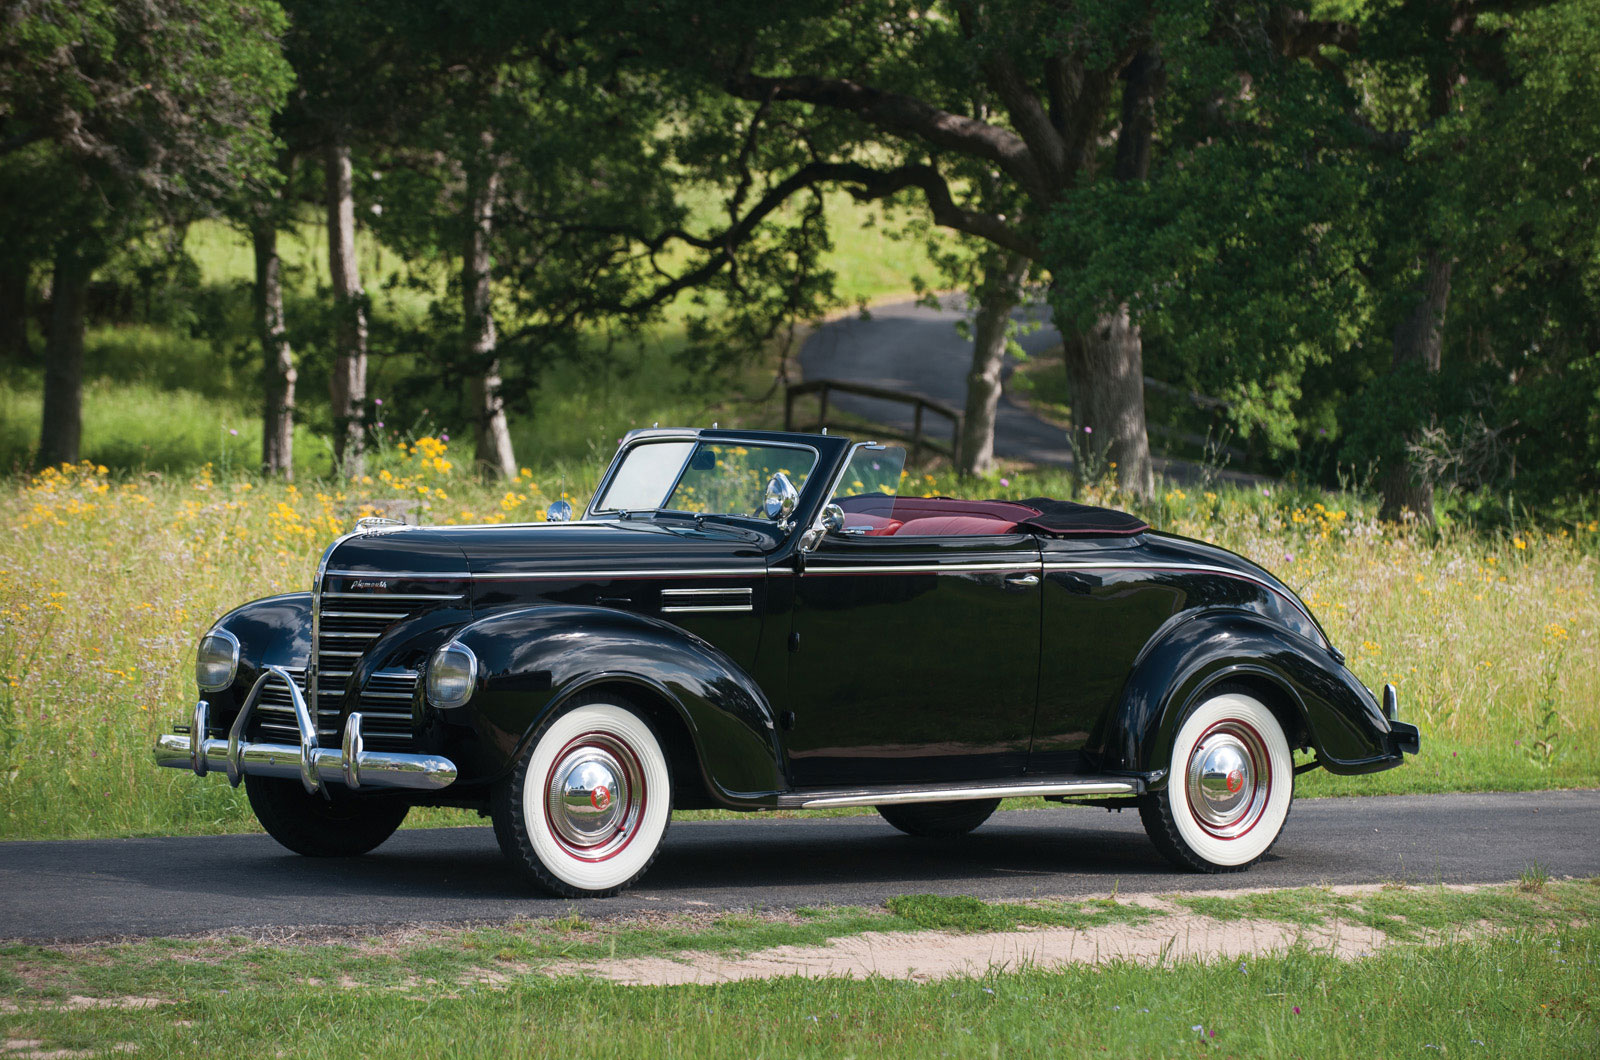 <p>Plymouth was the only division of Chrysler to offer open-topped cars in 1939, and while rivals were also selling convertibles, none had one on its books with a power-operated roof. The car pictured is a 1939 Plymouth Deluxe convertible, which was powered by a 201ci (3292cc) six-cylinder engine.</p><p><strong>GROUNDBREAKER SCORE: 6 </strong>– a wonderful added luxury.</p>